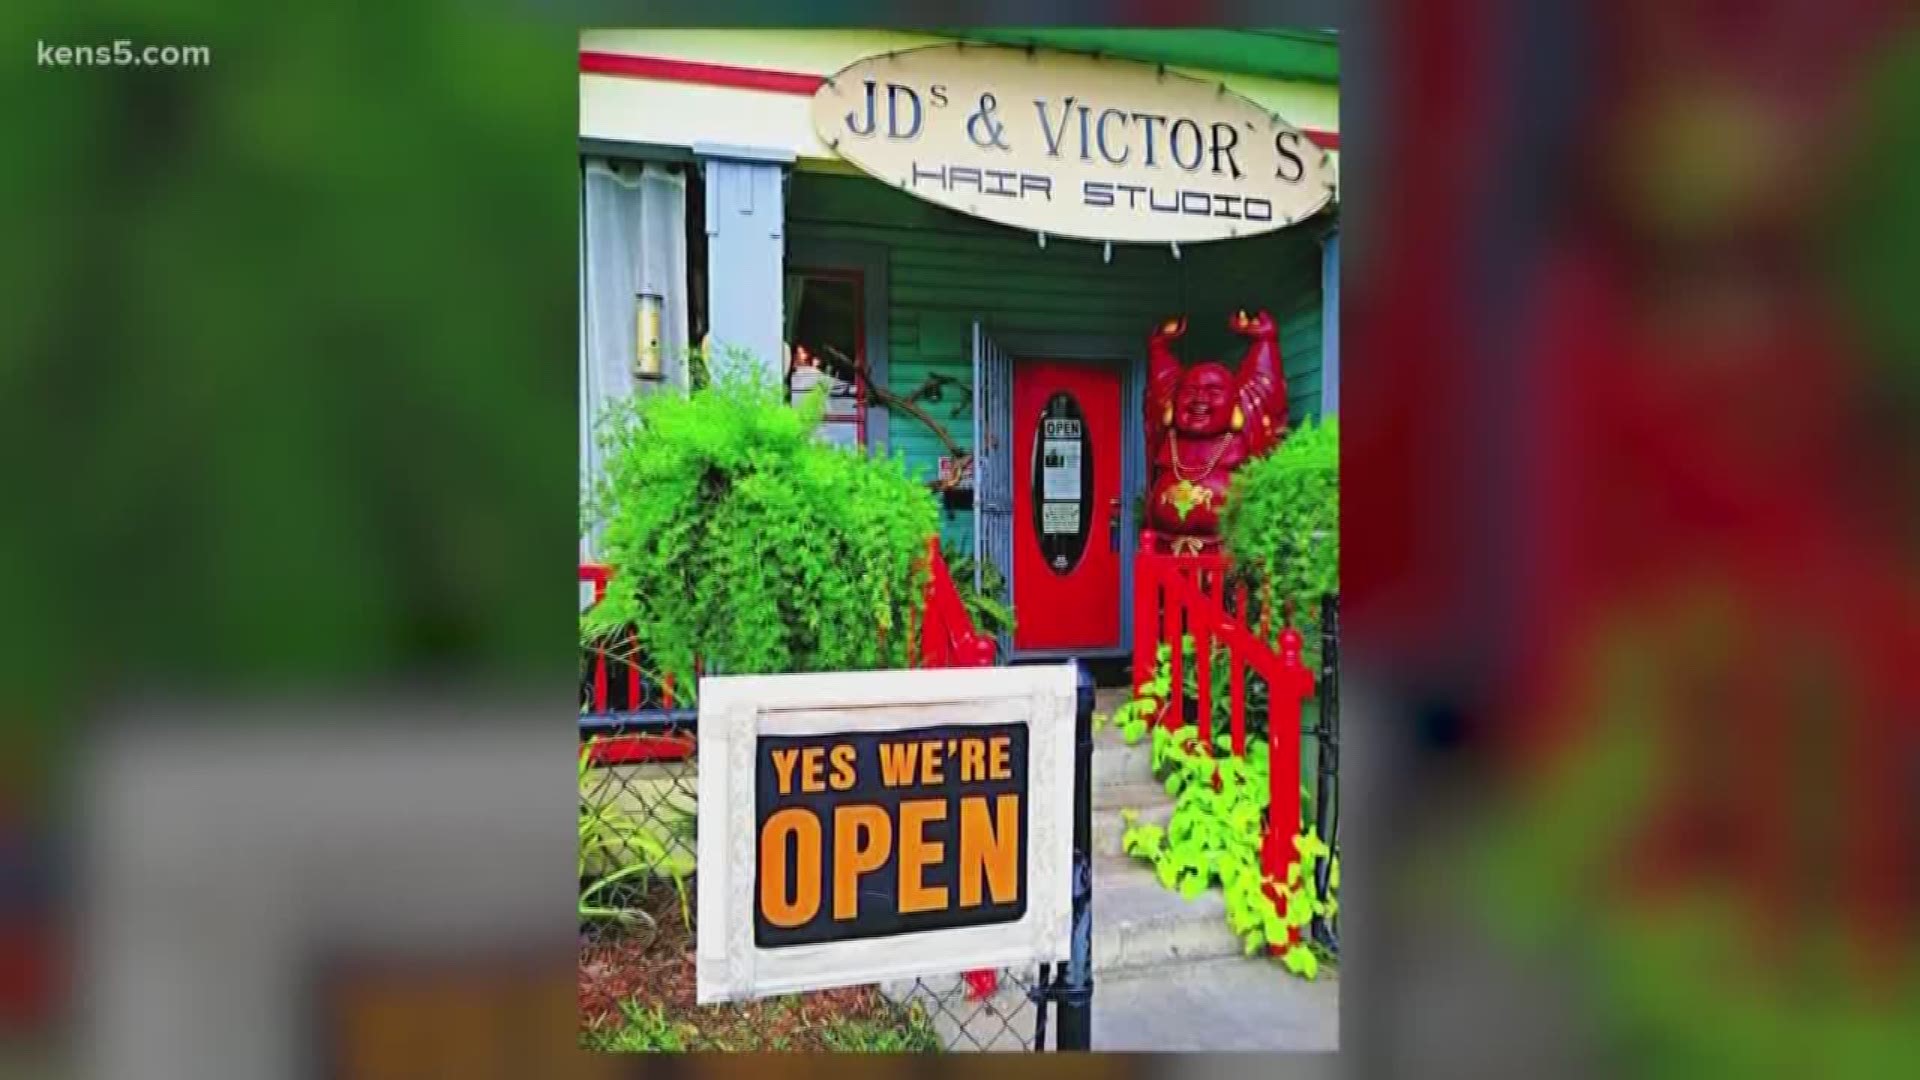 A seven-foot-tall red Buddha was taken from JD's and Victor's Hair Salon on the west-side and the owners are looking for the public's help in finding it.